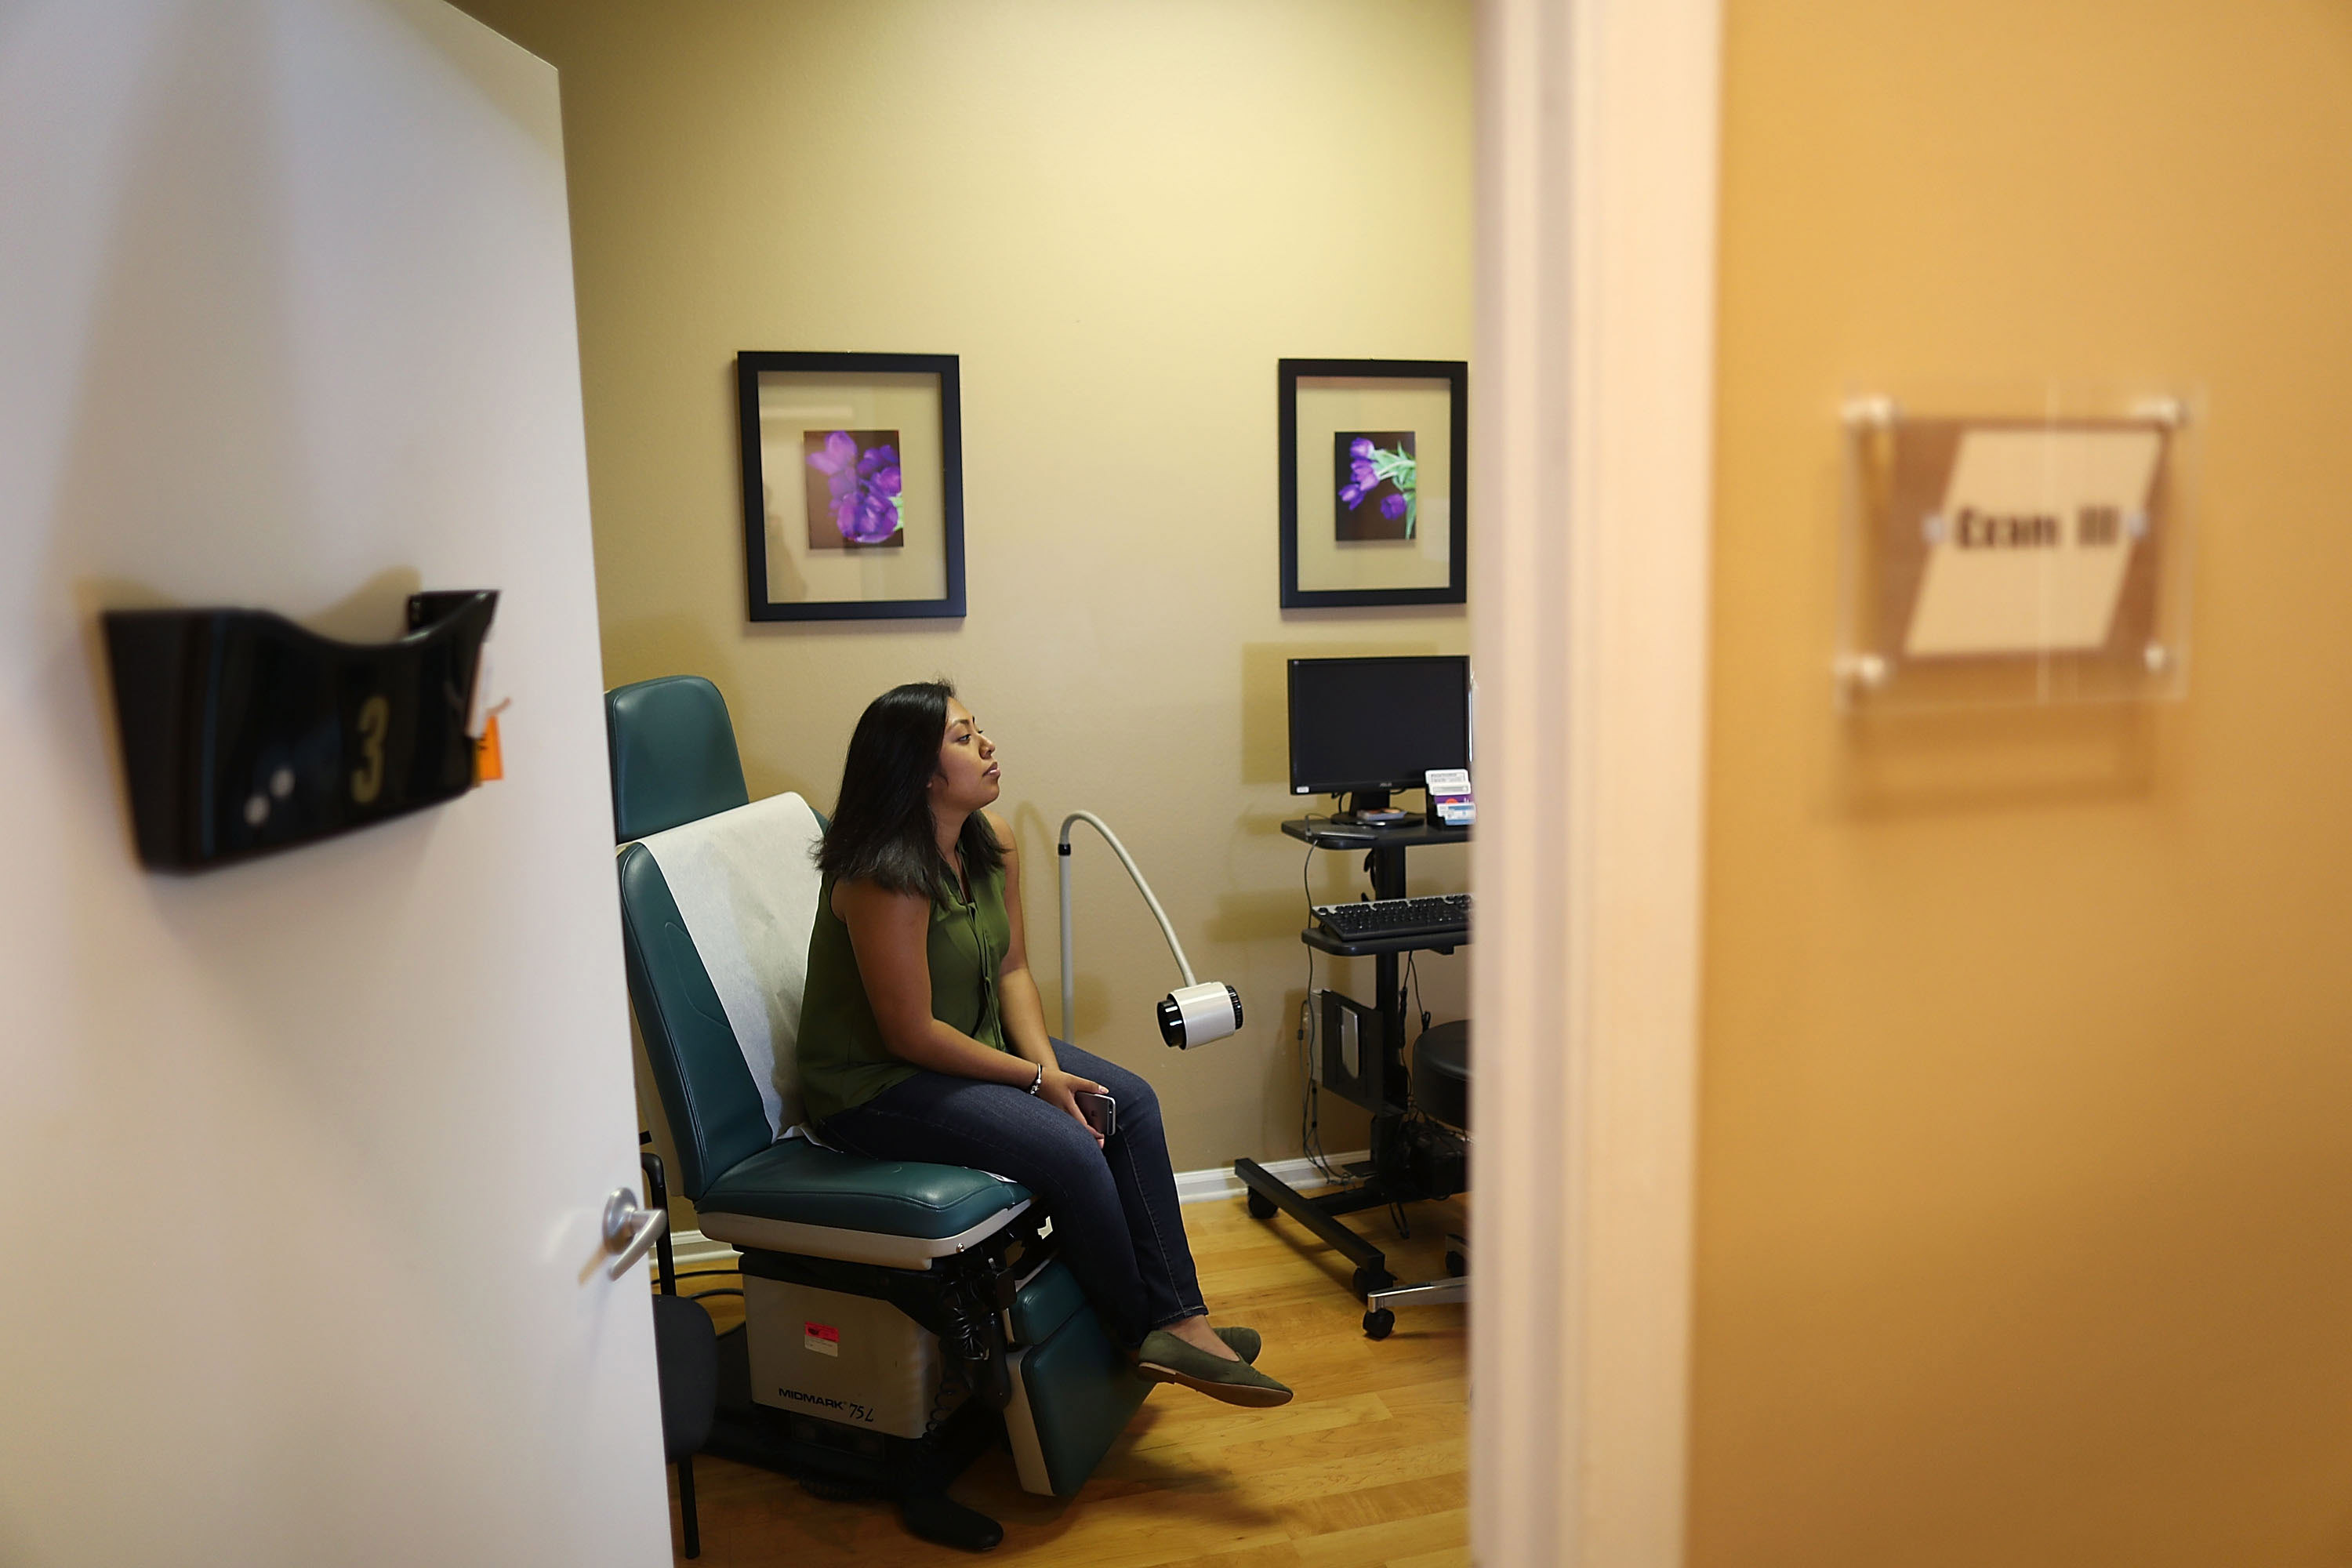 Natalia Reyes sits in the exam room as she gets a health care checkup at a Planned Parenthood health center ... (Photo by Joe Raedle/Getty Images)